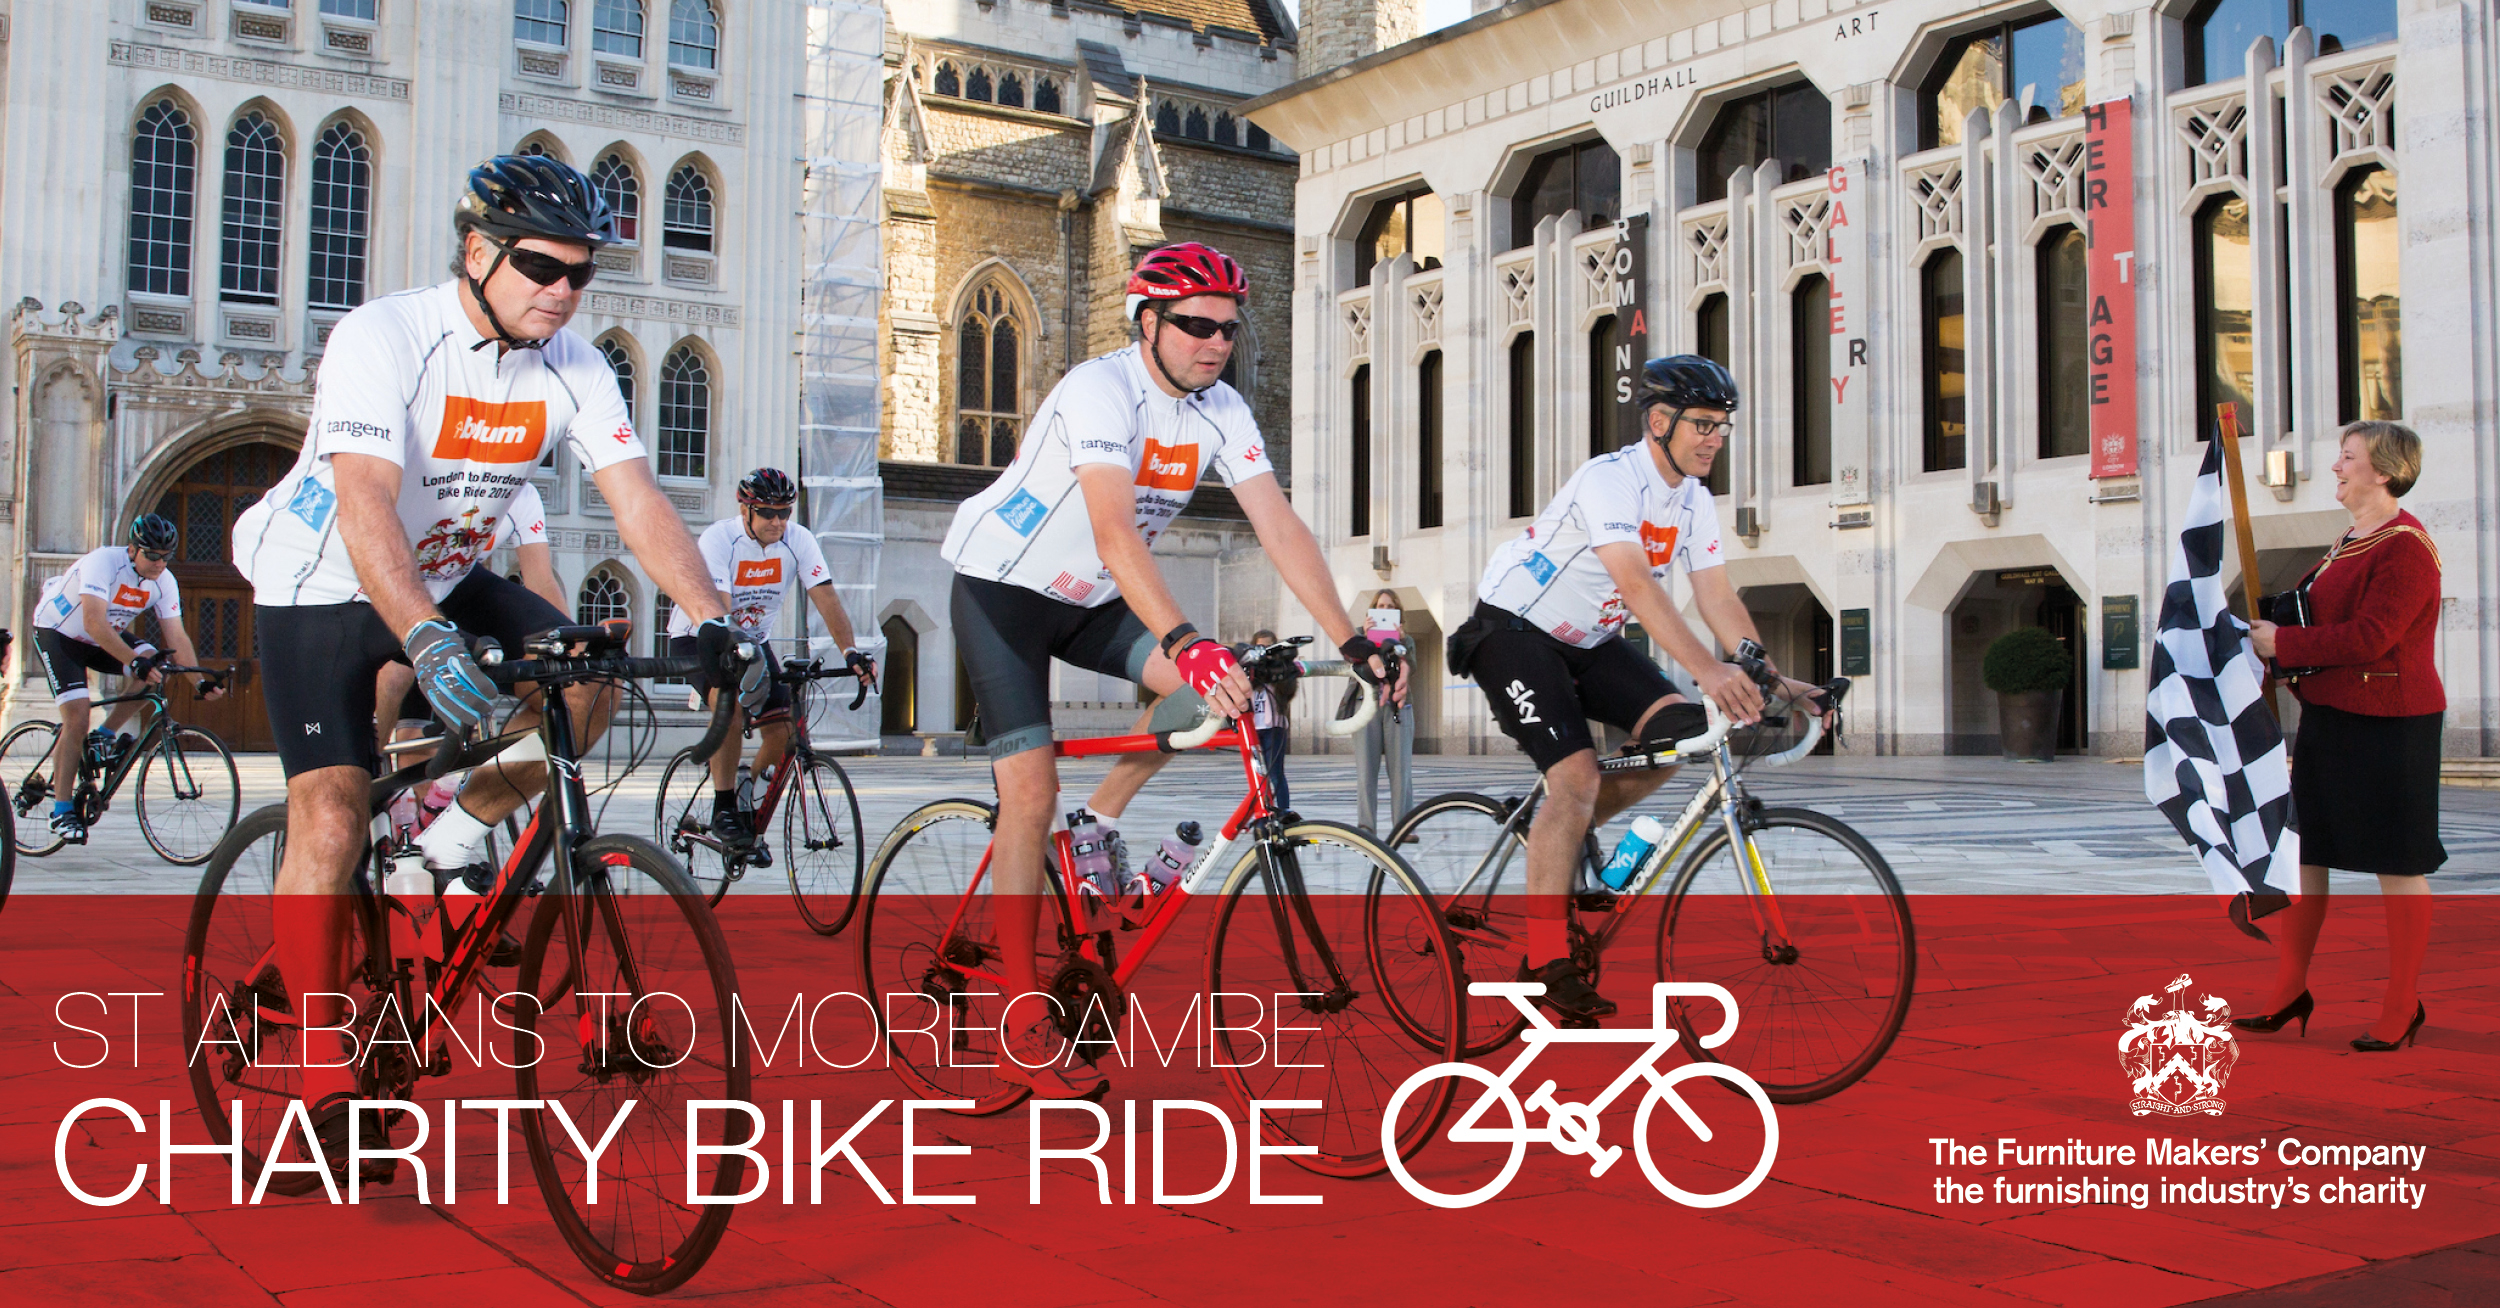 Biesse proud to be sponsoring the Furniture Makers&#39; Company Charity Bike Ride